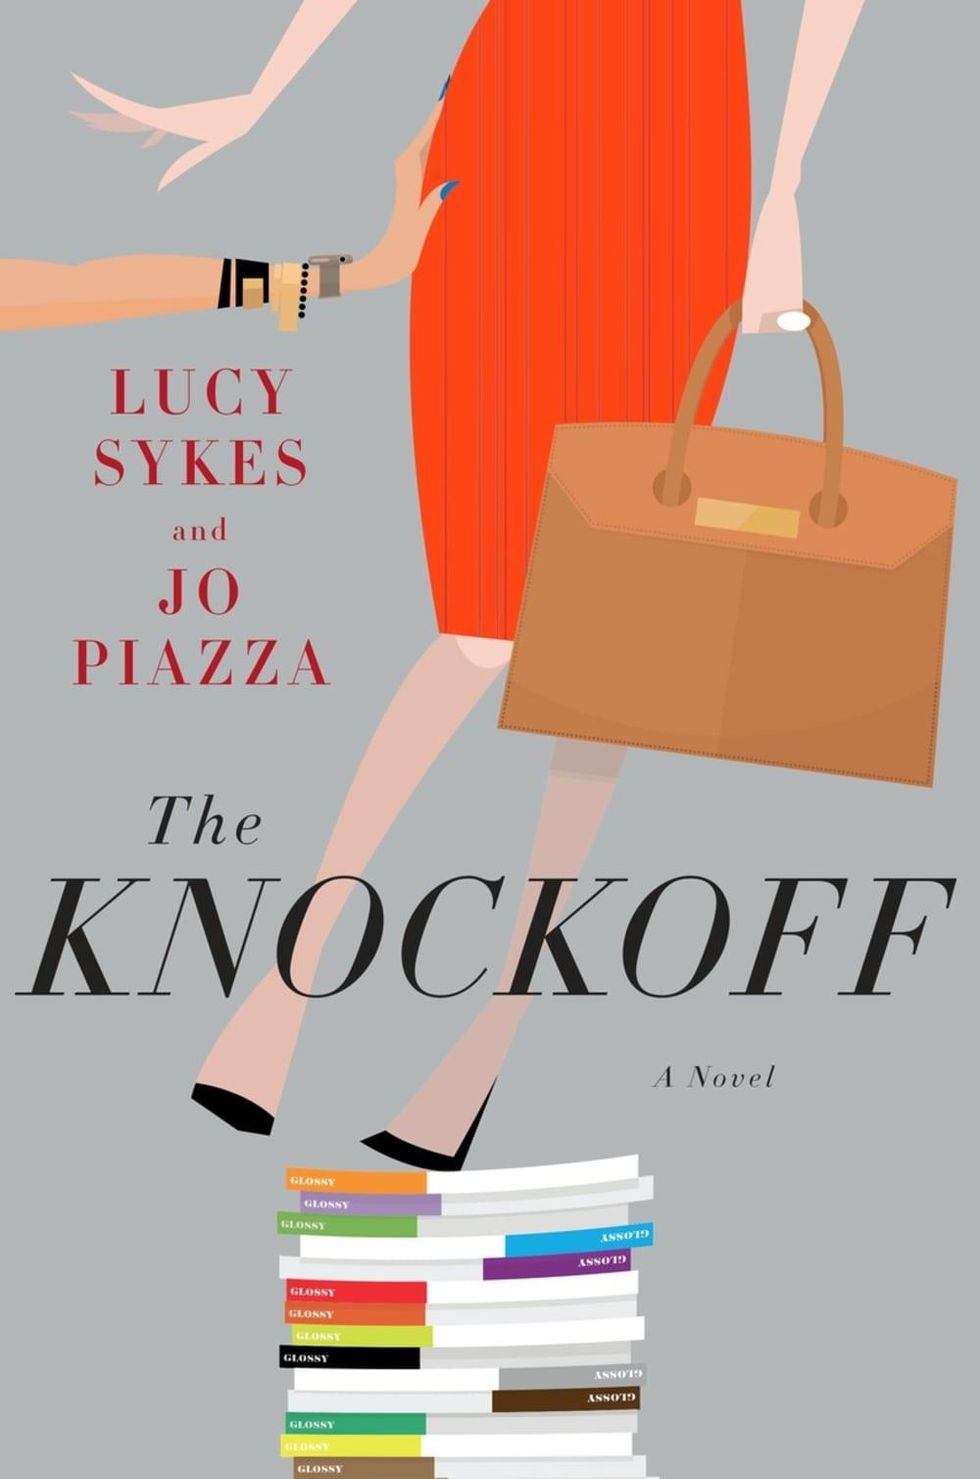 Lucy Sykes book The Knockoff